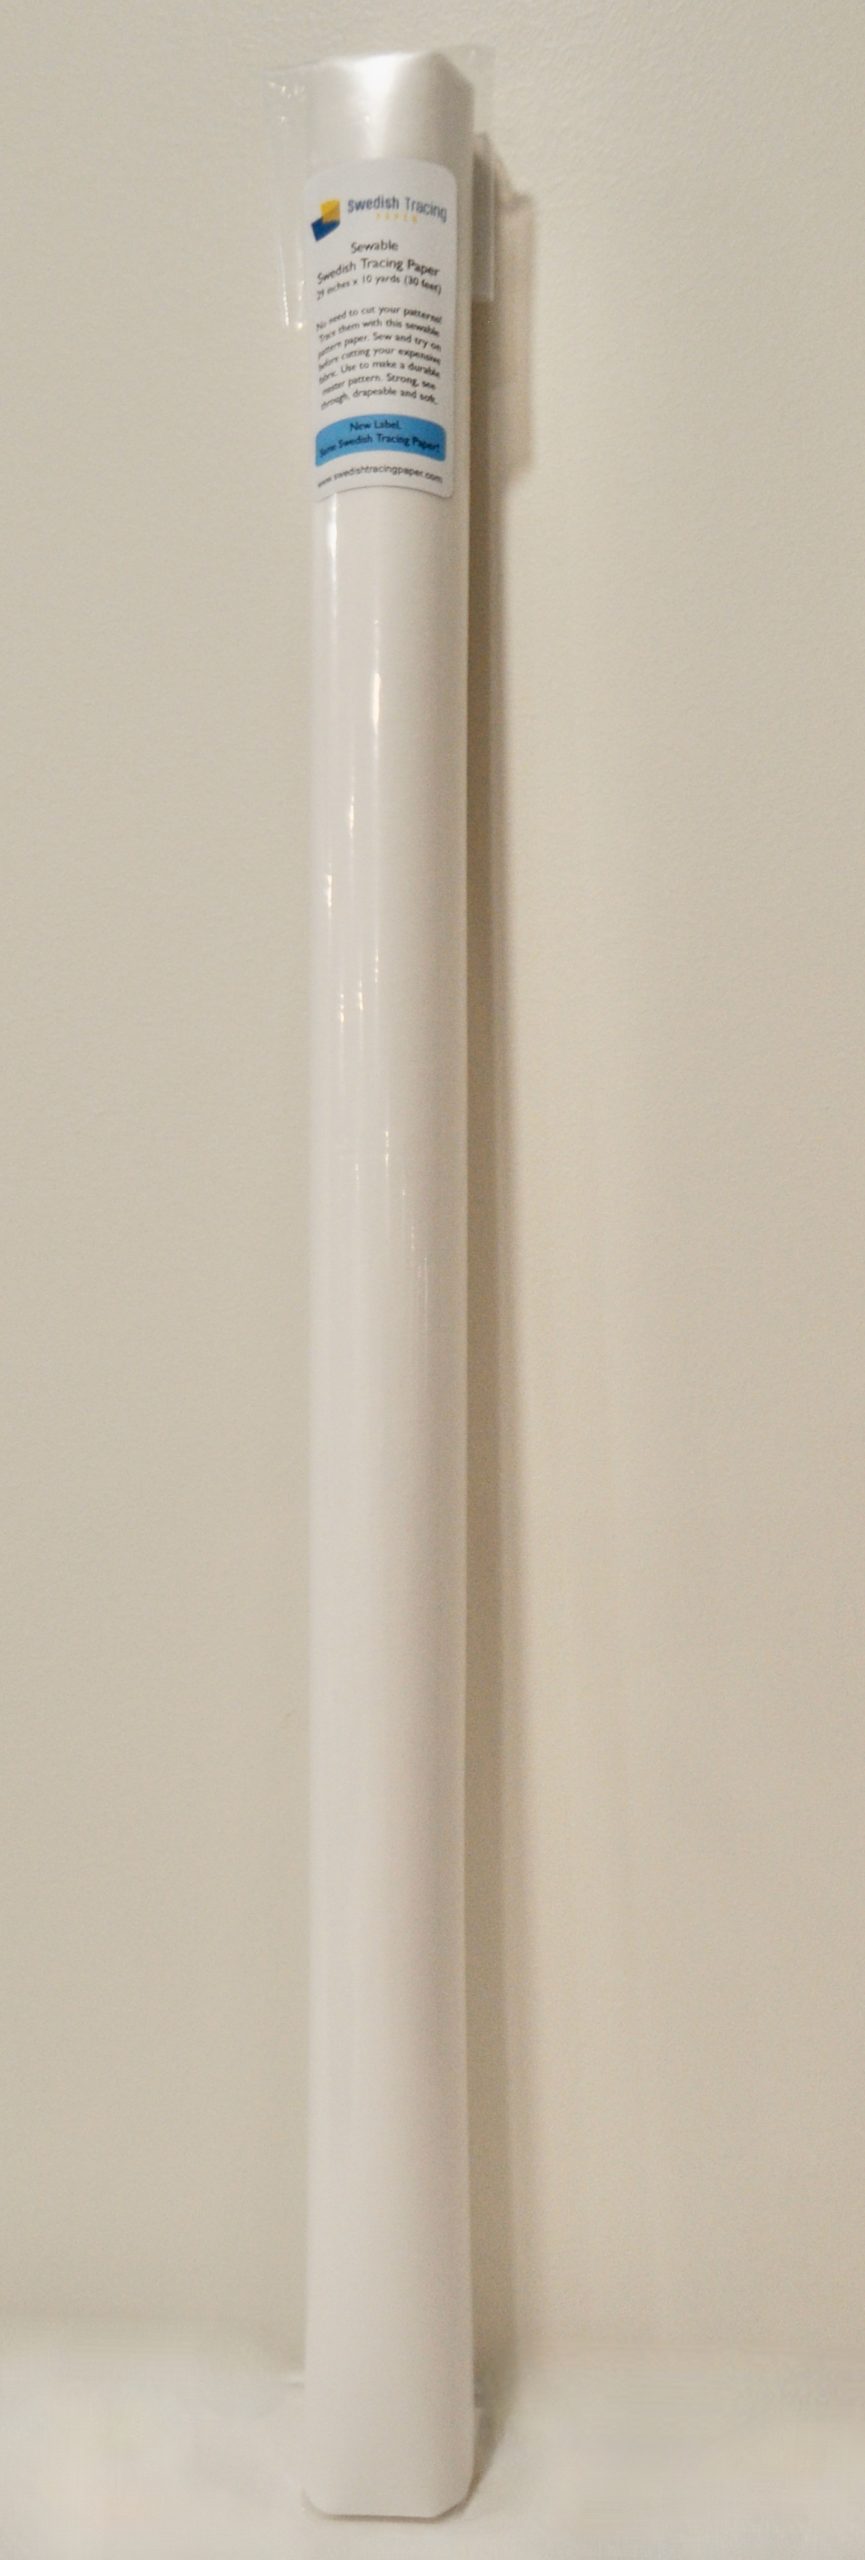 12 Tracing Paper Roll